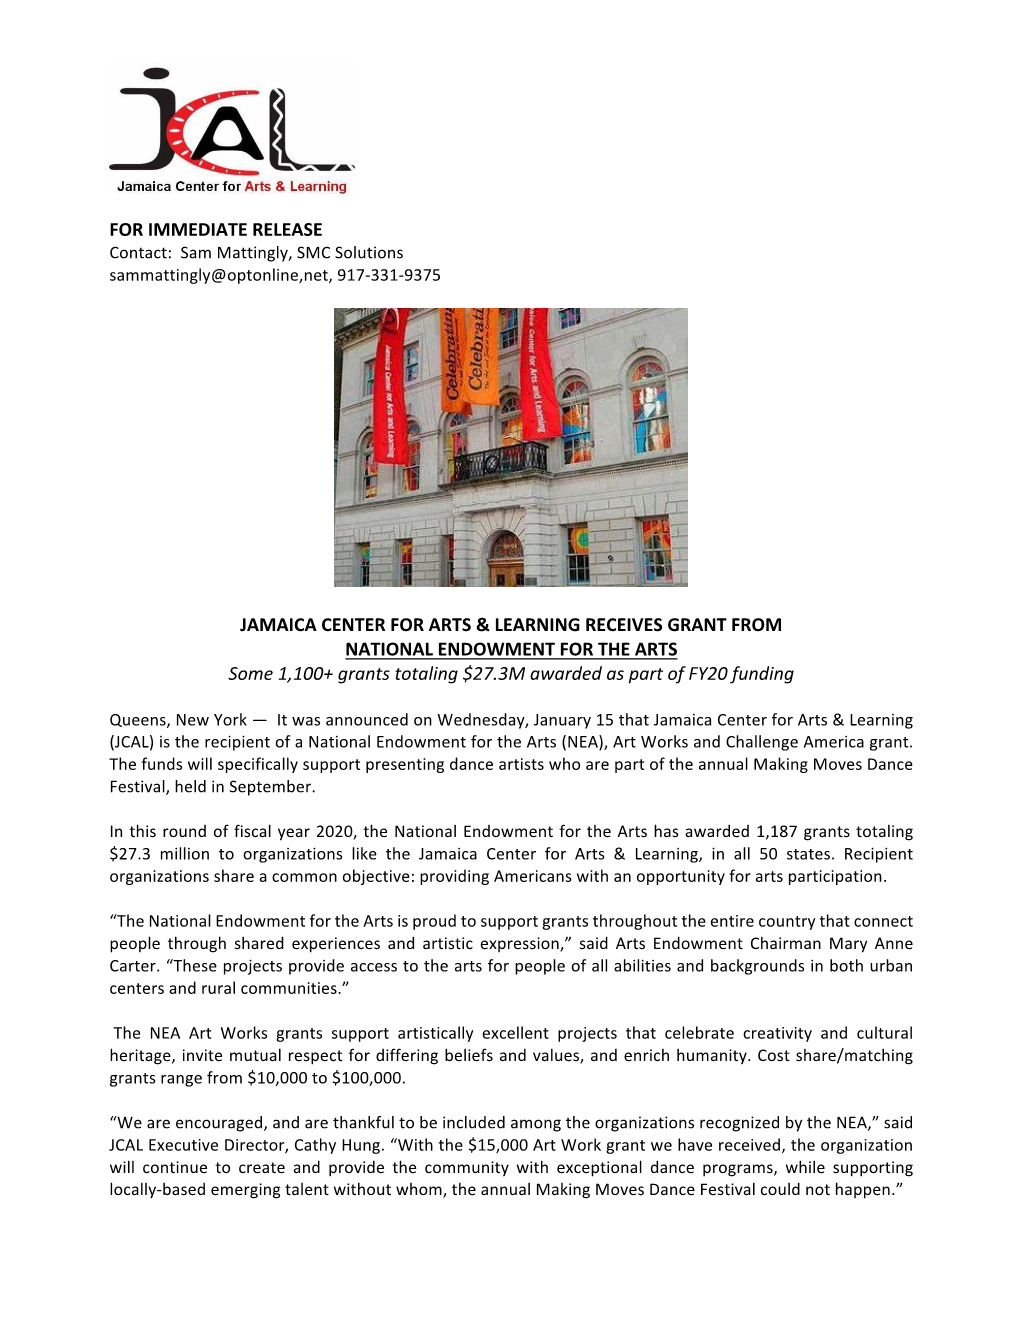 For Immediate Release Jamaica Center for Arts & Learning